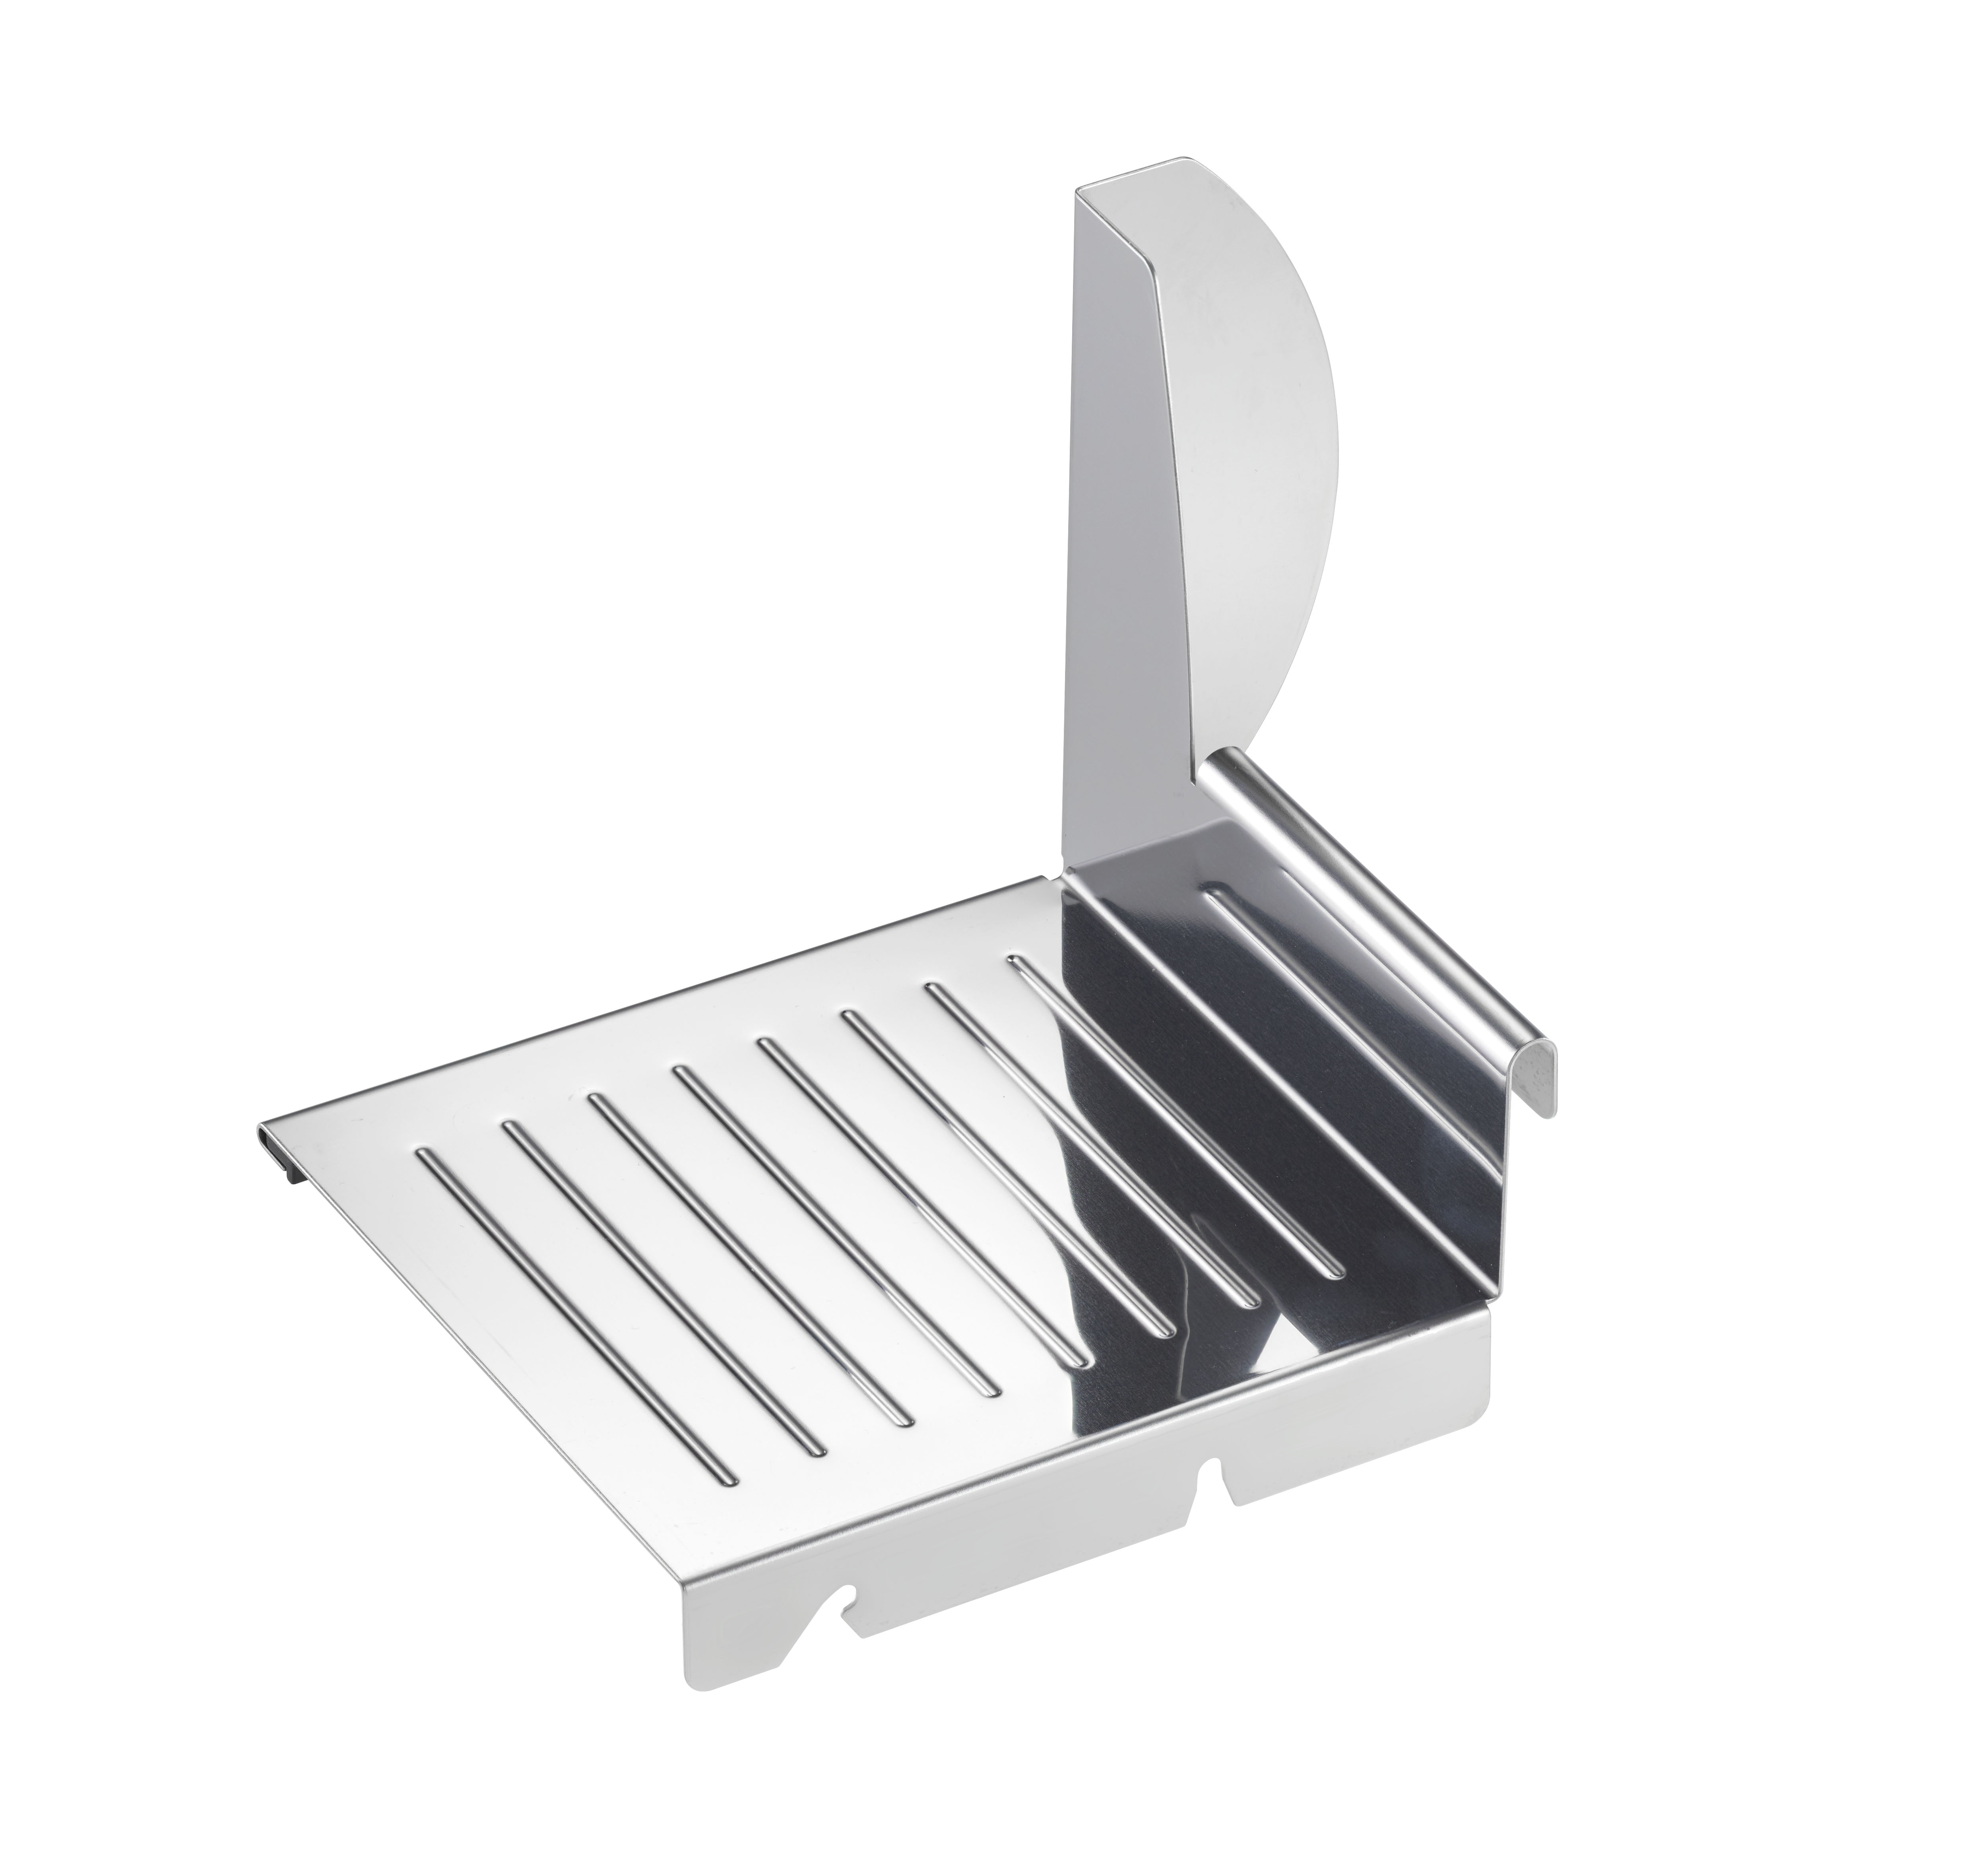 Stainless steel slicing carriage